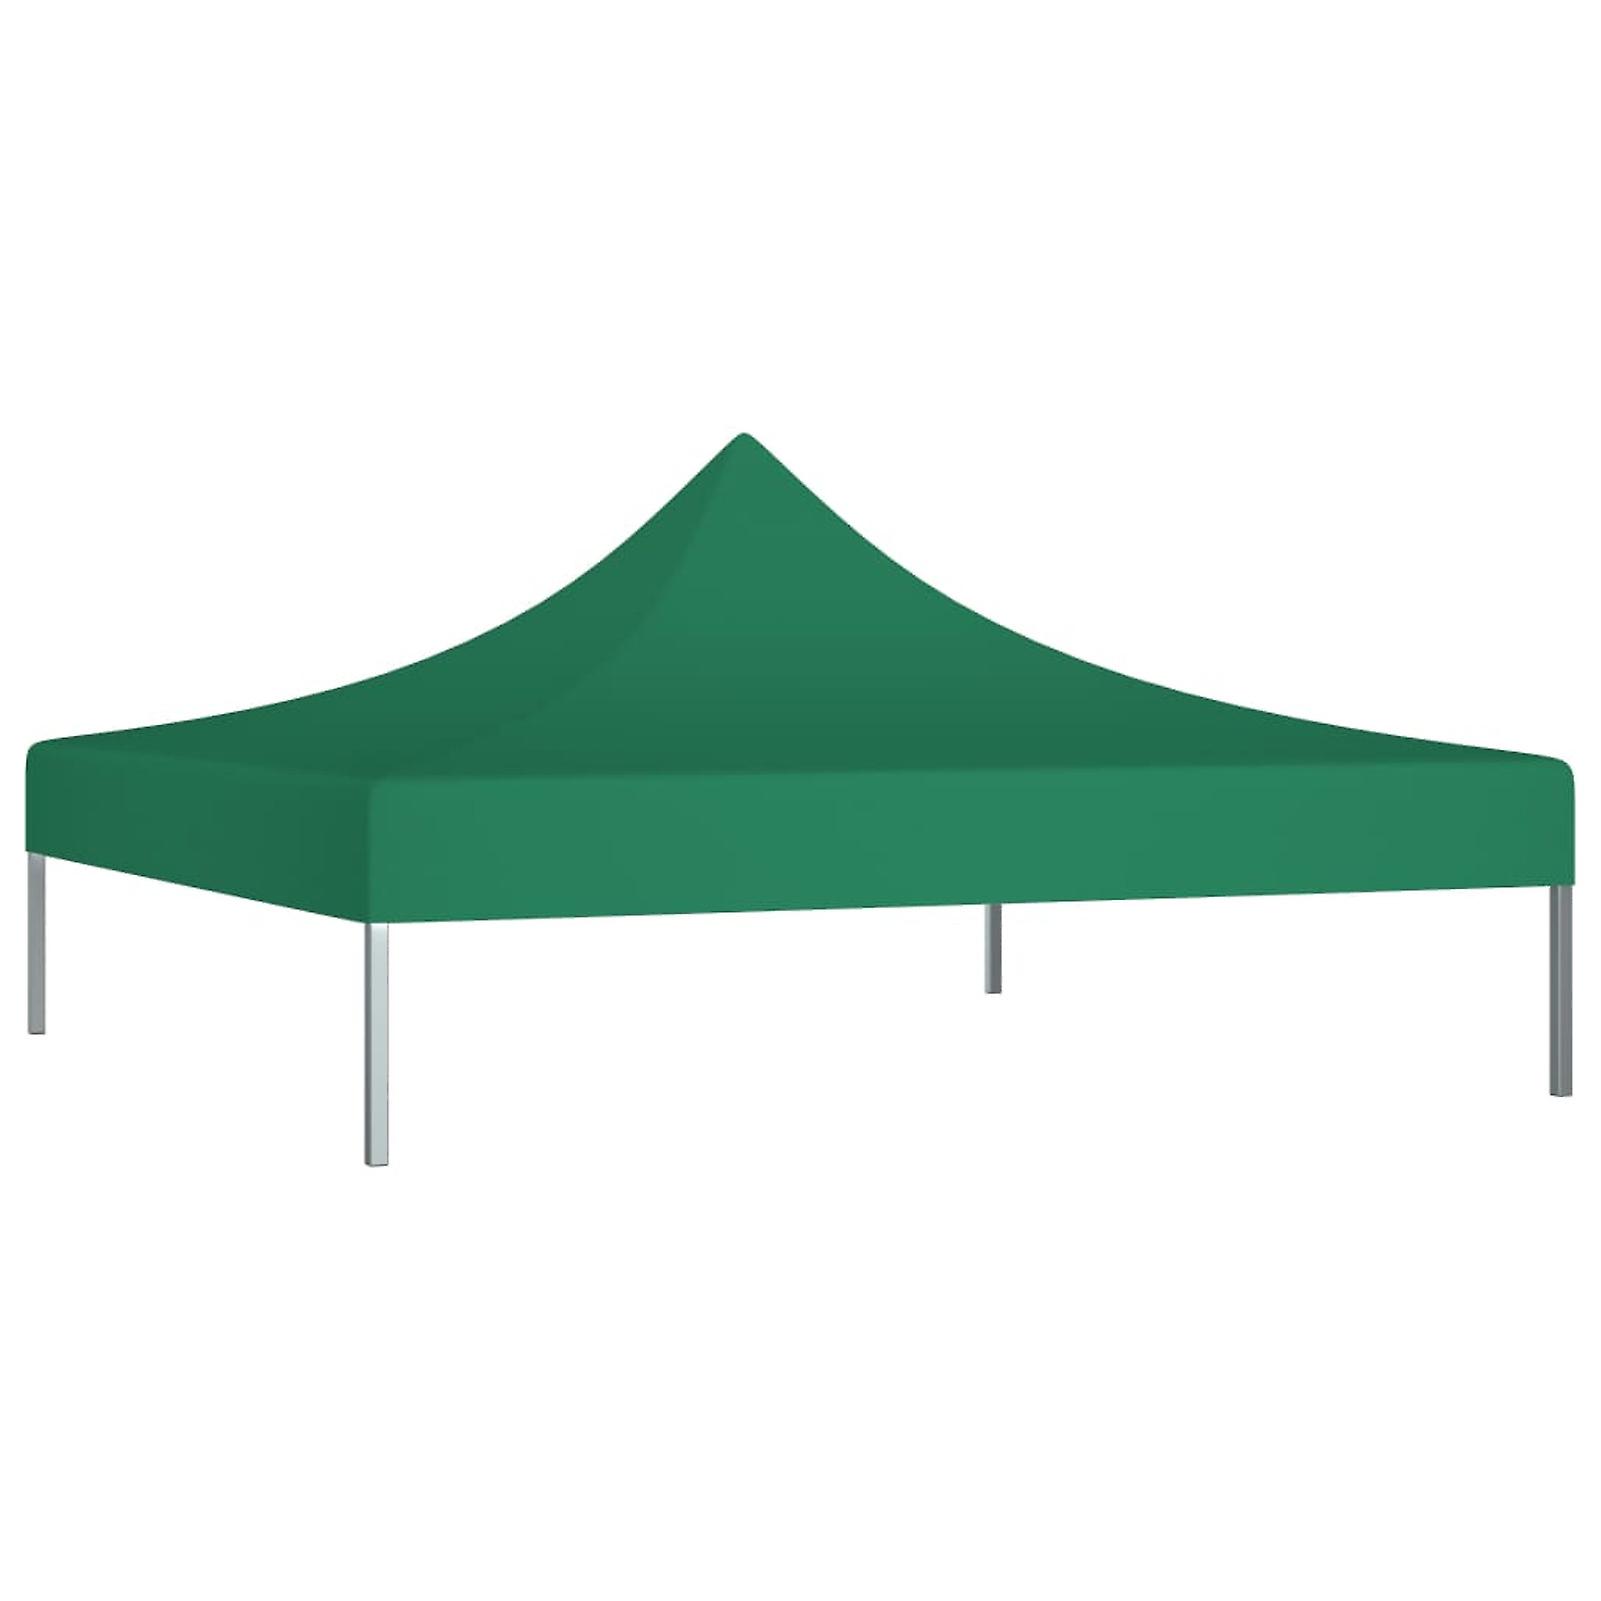 Tent Roof For Celebrations Green 2x2 M 270 G/m No.361090